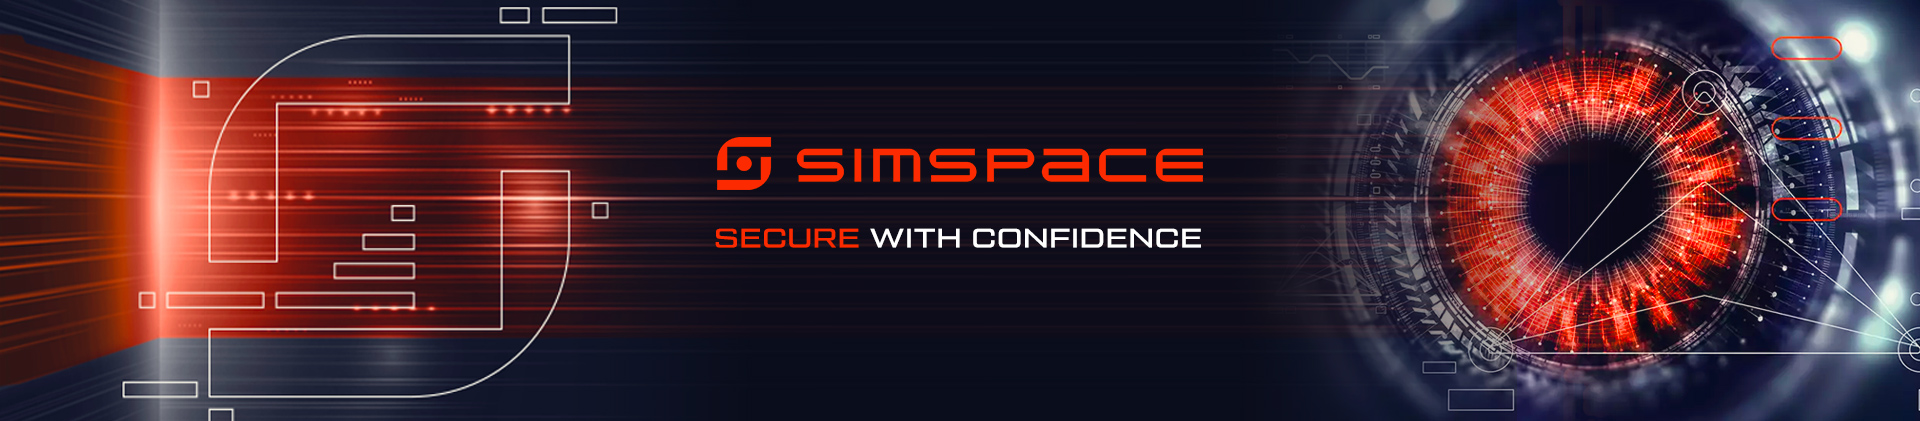 We are a SimSpace partner